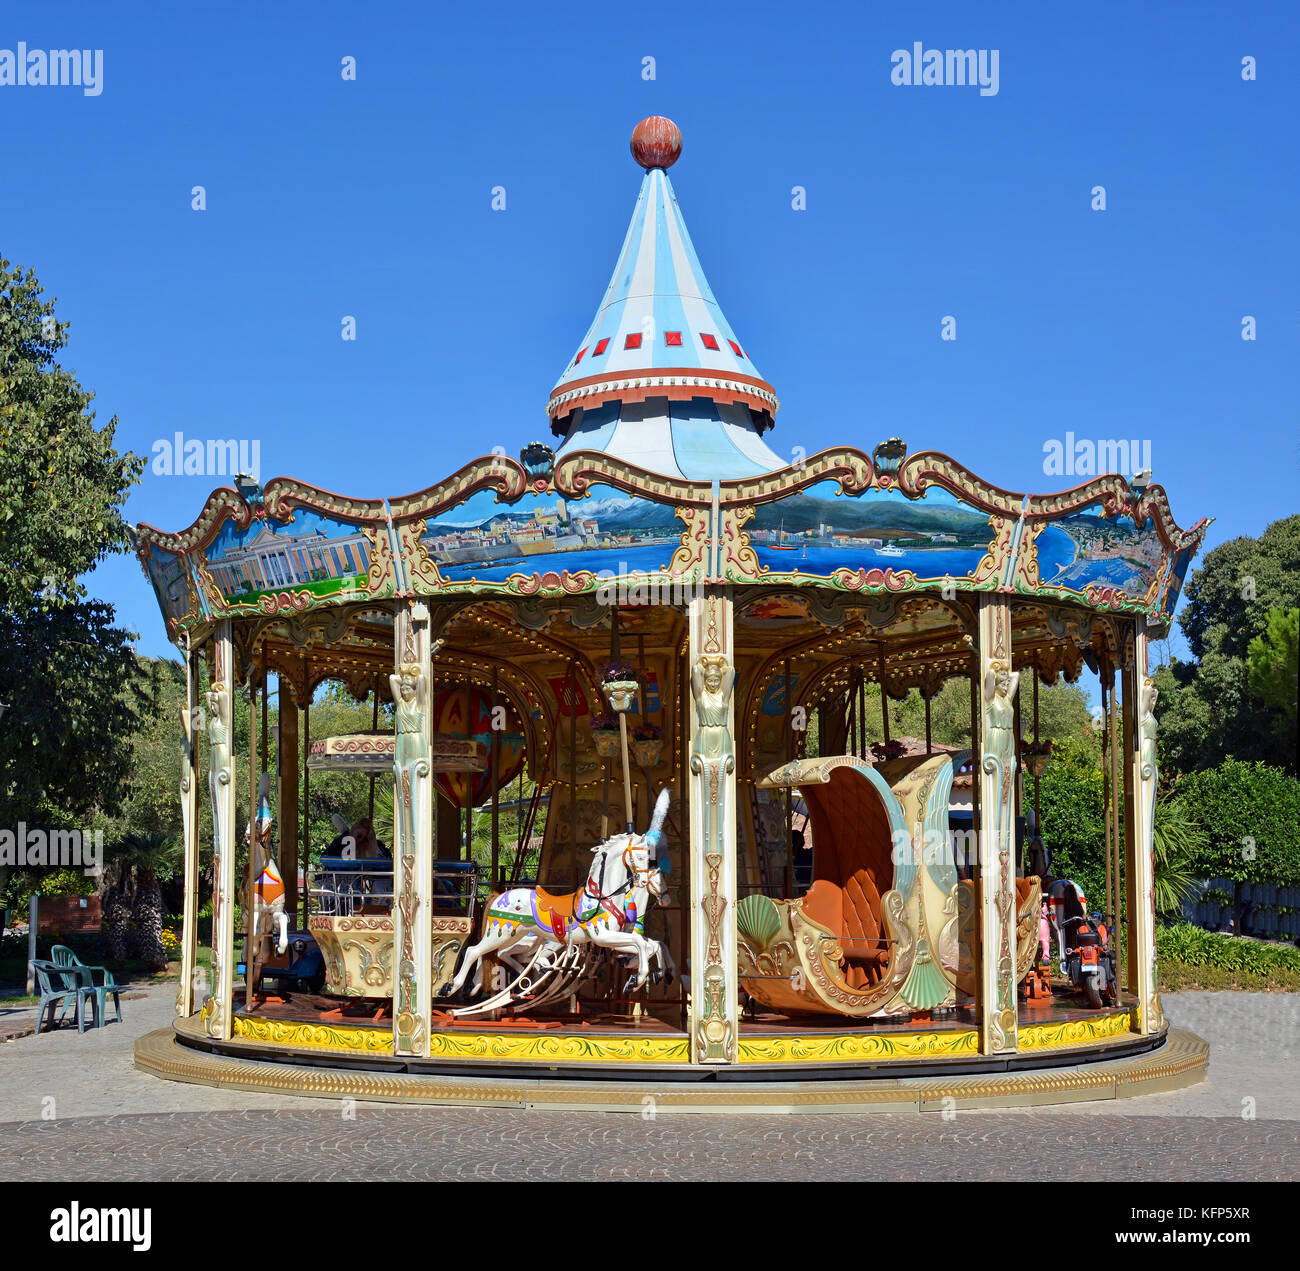 Children's Carousel in an Antibes Square, Cote d'azur, Provence; France Stock Photo